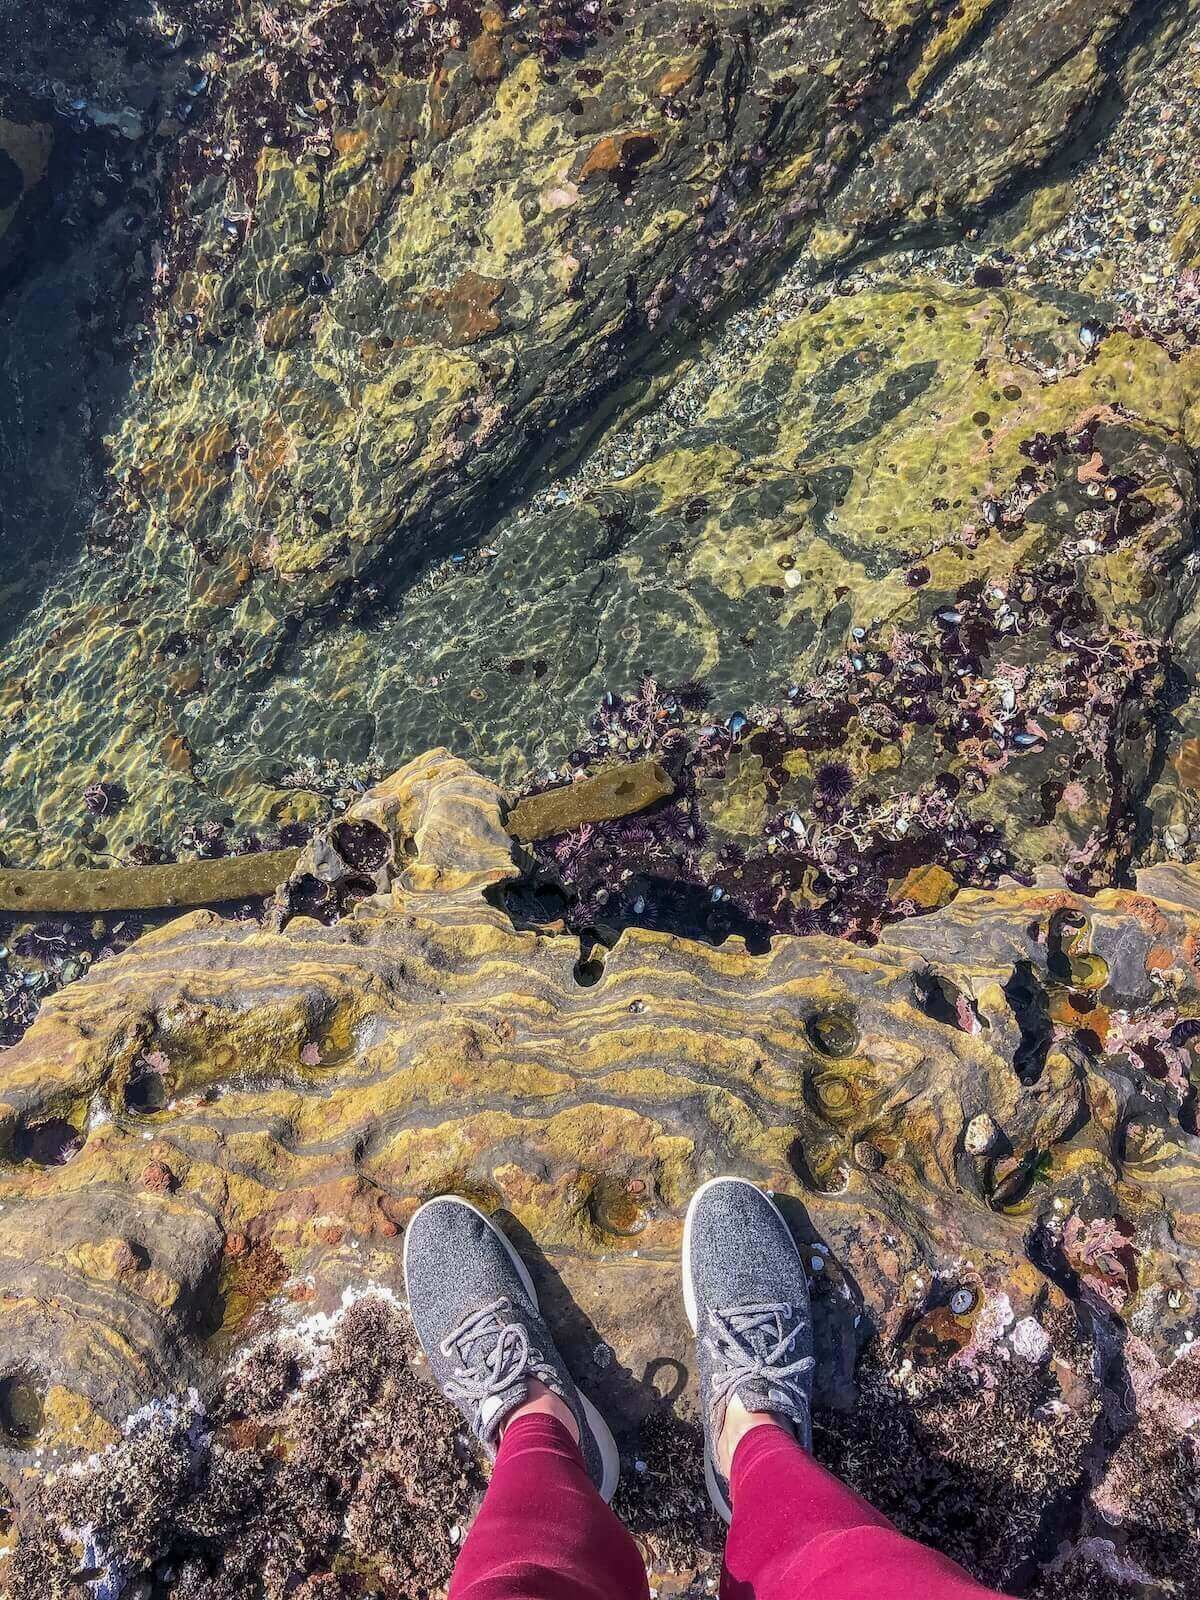 A view looking down at a pair of feet wearing grey sneakers and standing at the edge of a tidepool.